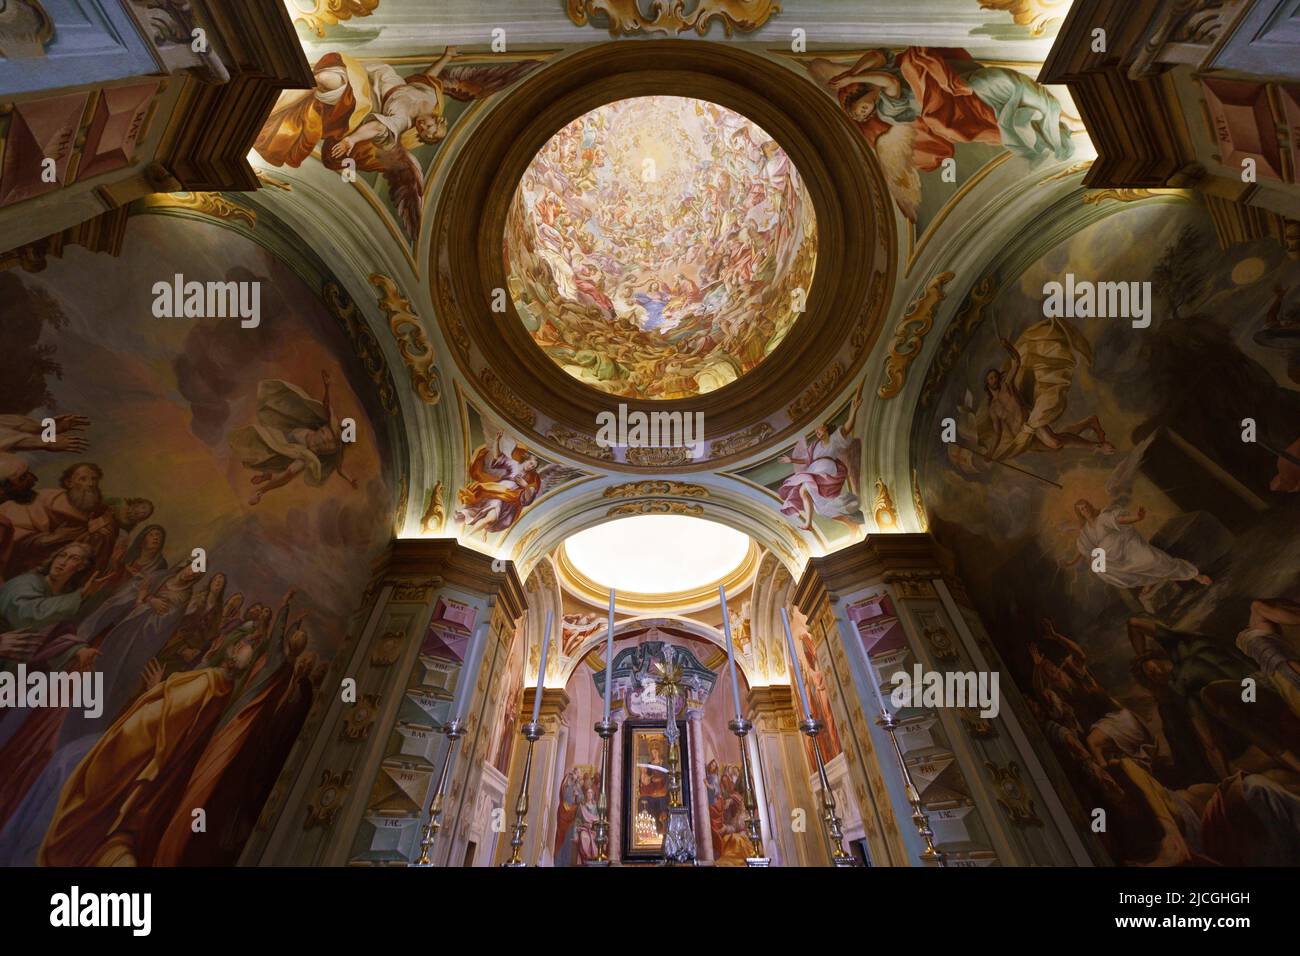 Interior of the Sanctuary of Varallino, at Galliate, in Novara province, Piedmont, Italy, with paintings and sculptures Stock Photo